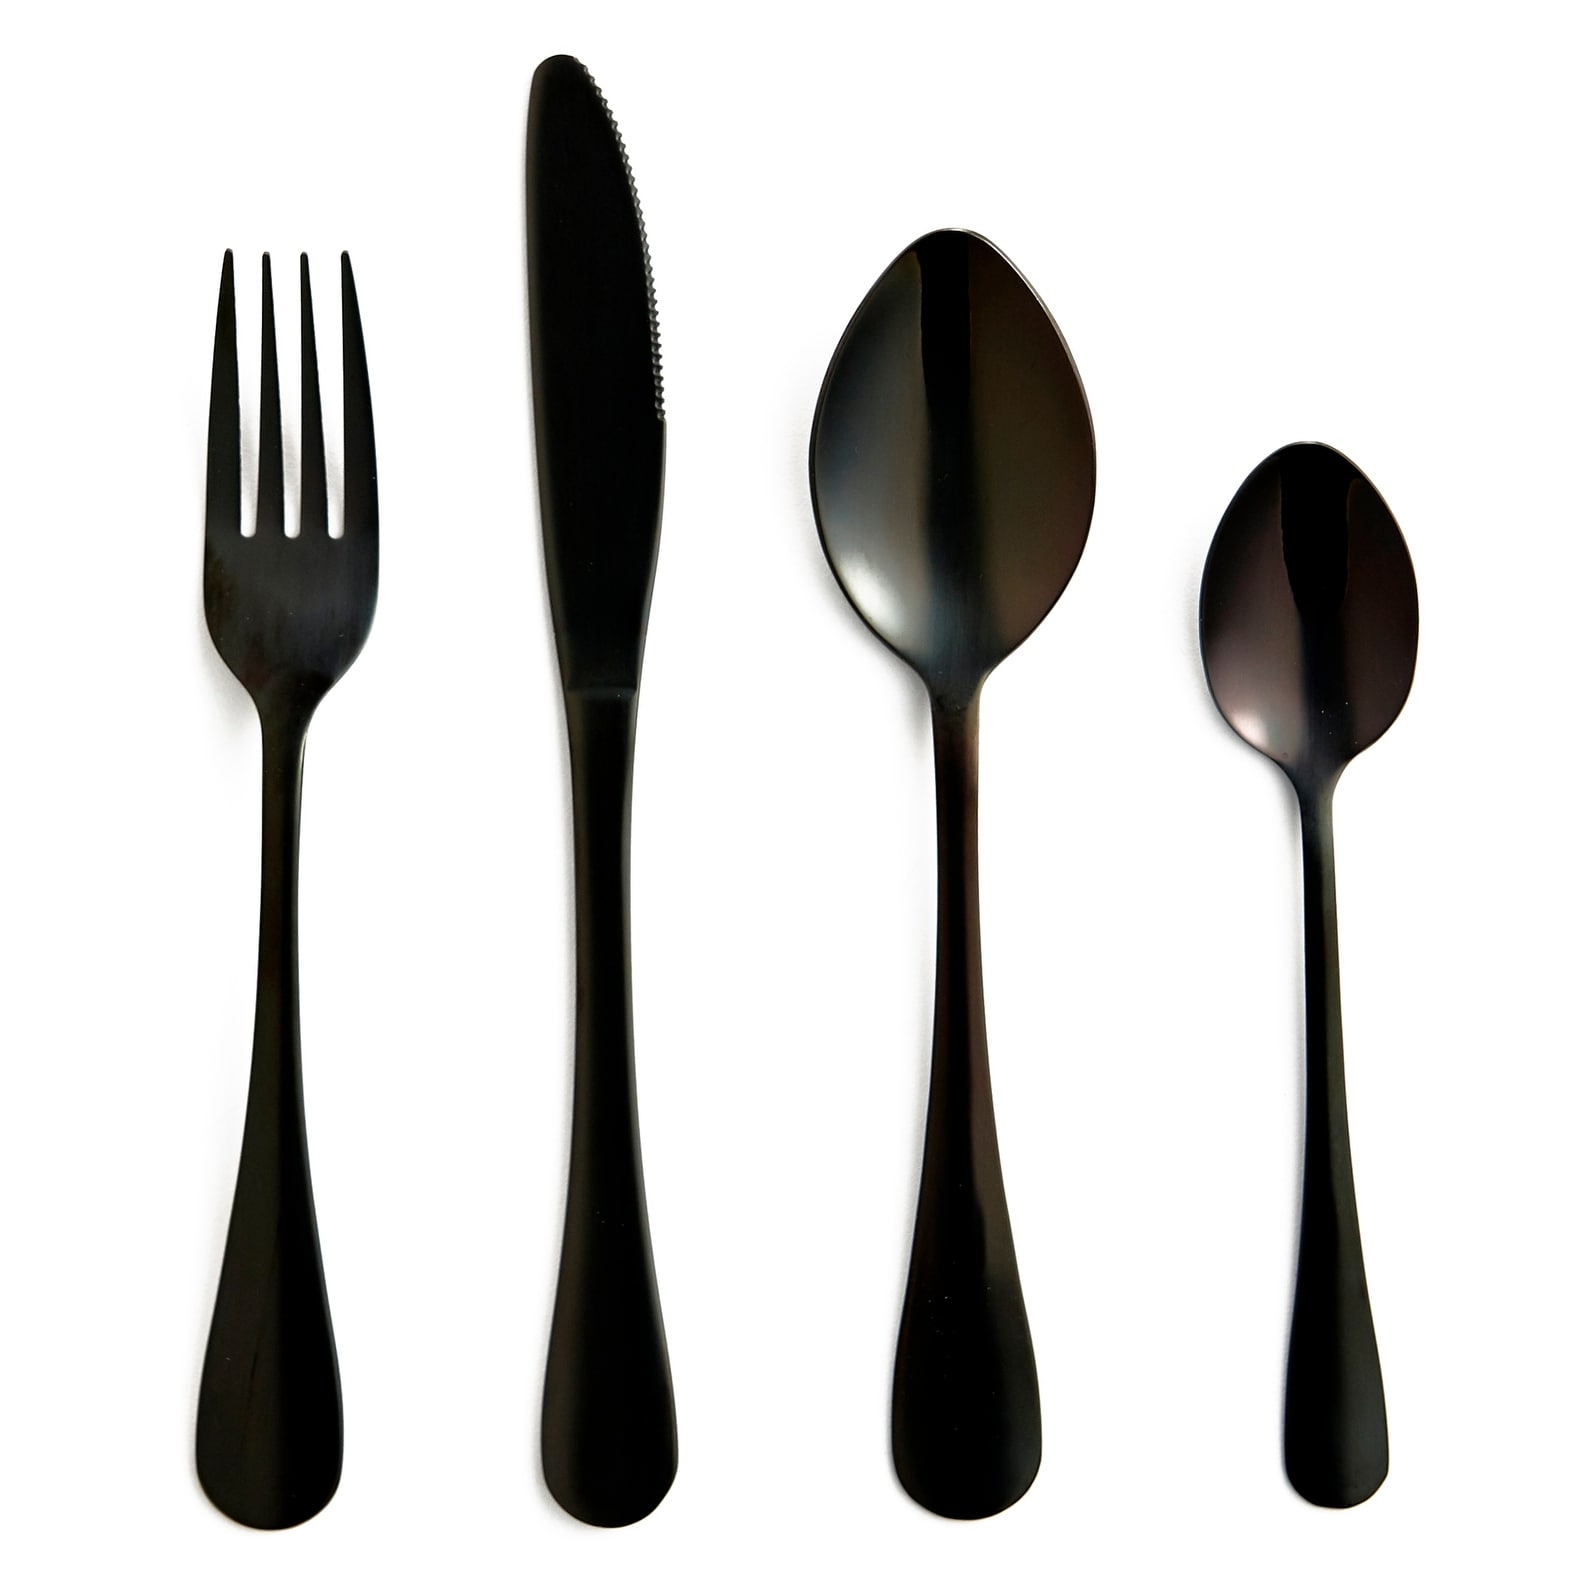 https://ak1.ostkcdn.com/images/products/is/images/direct/1c76a6e5f8e130eaa5dbb4e0dcc351128a80e0b4/Flatware-Stainless-Steel-Onyx-Black-16PC-Set.jpg